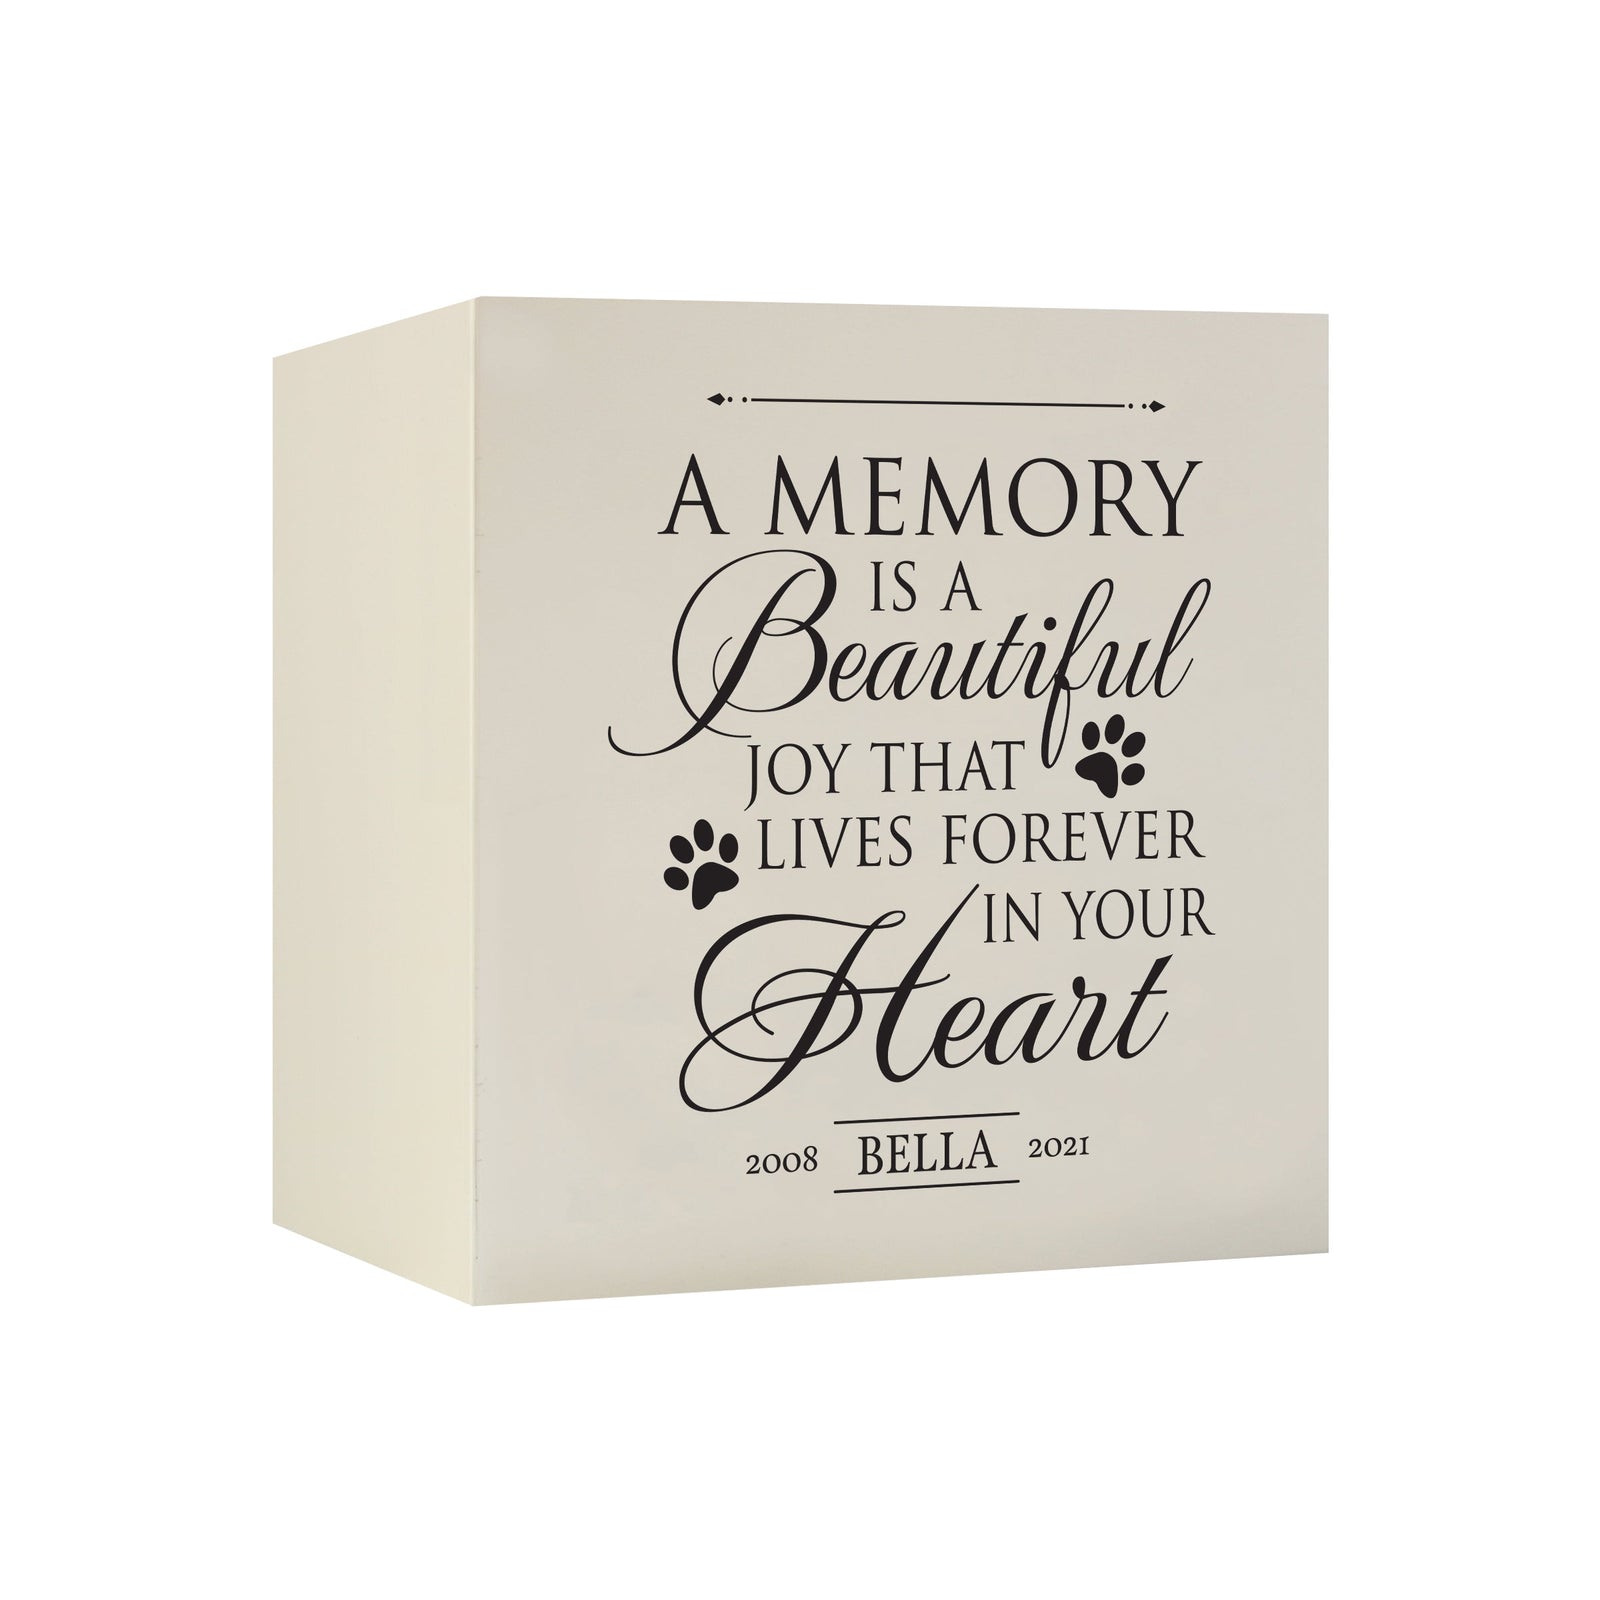 Pet Memorial Shadow Box Cremation Urn for Dog or Cat - A Memory Is A Beautiful Joy